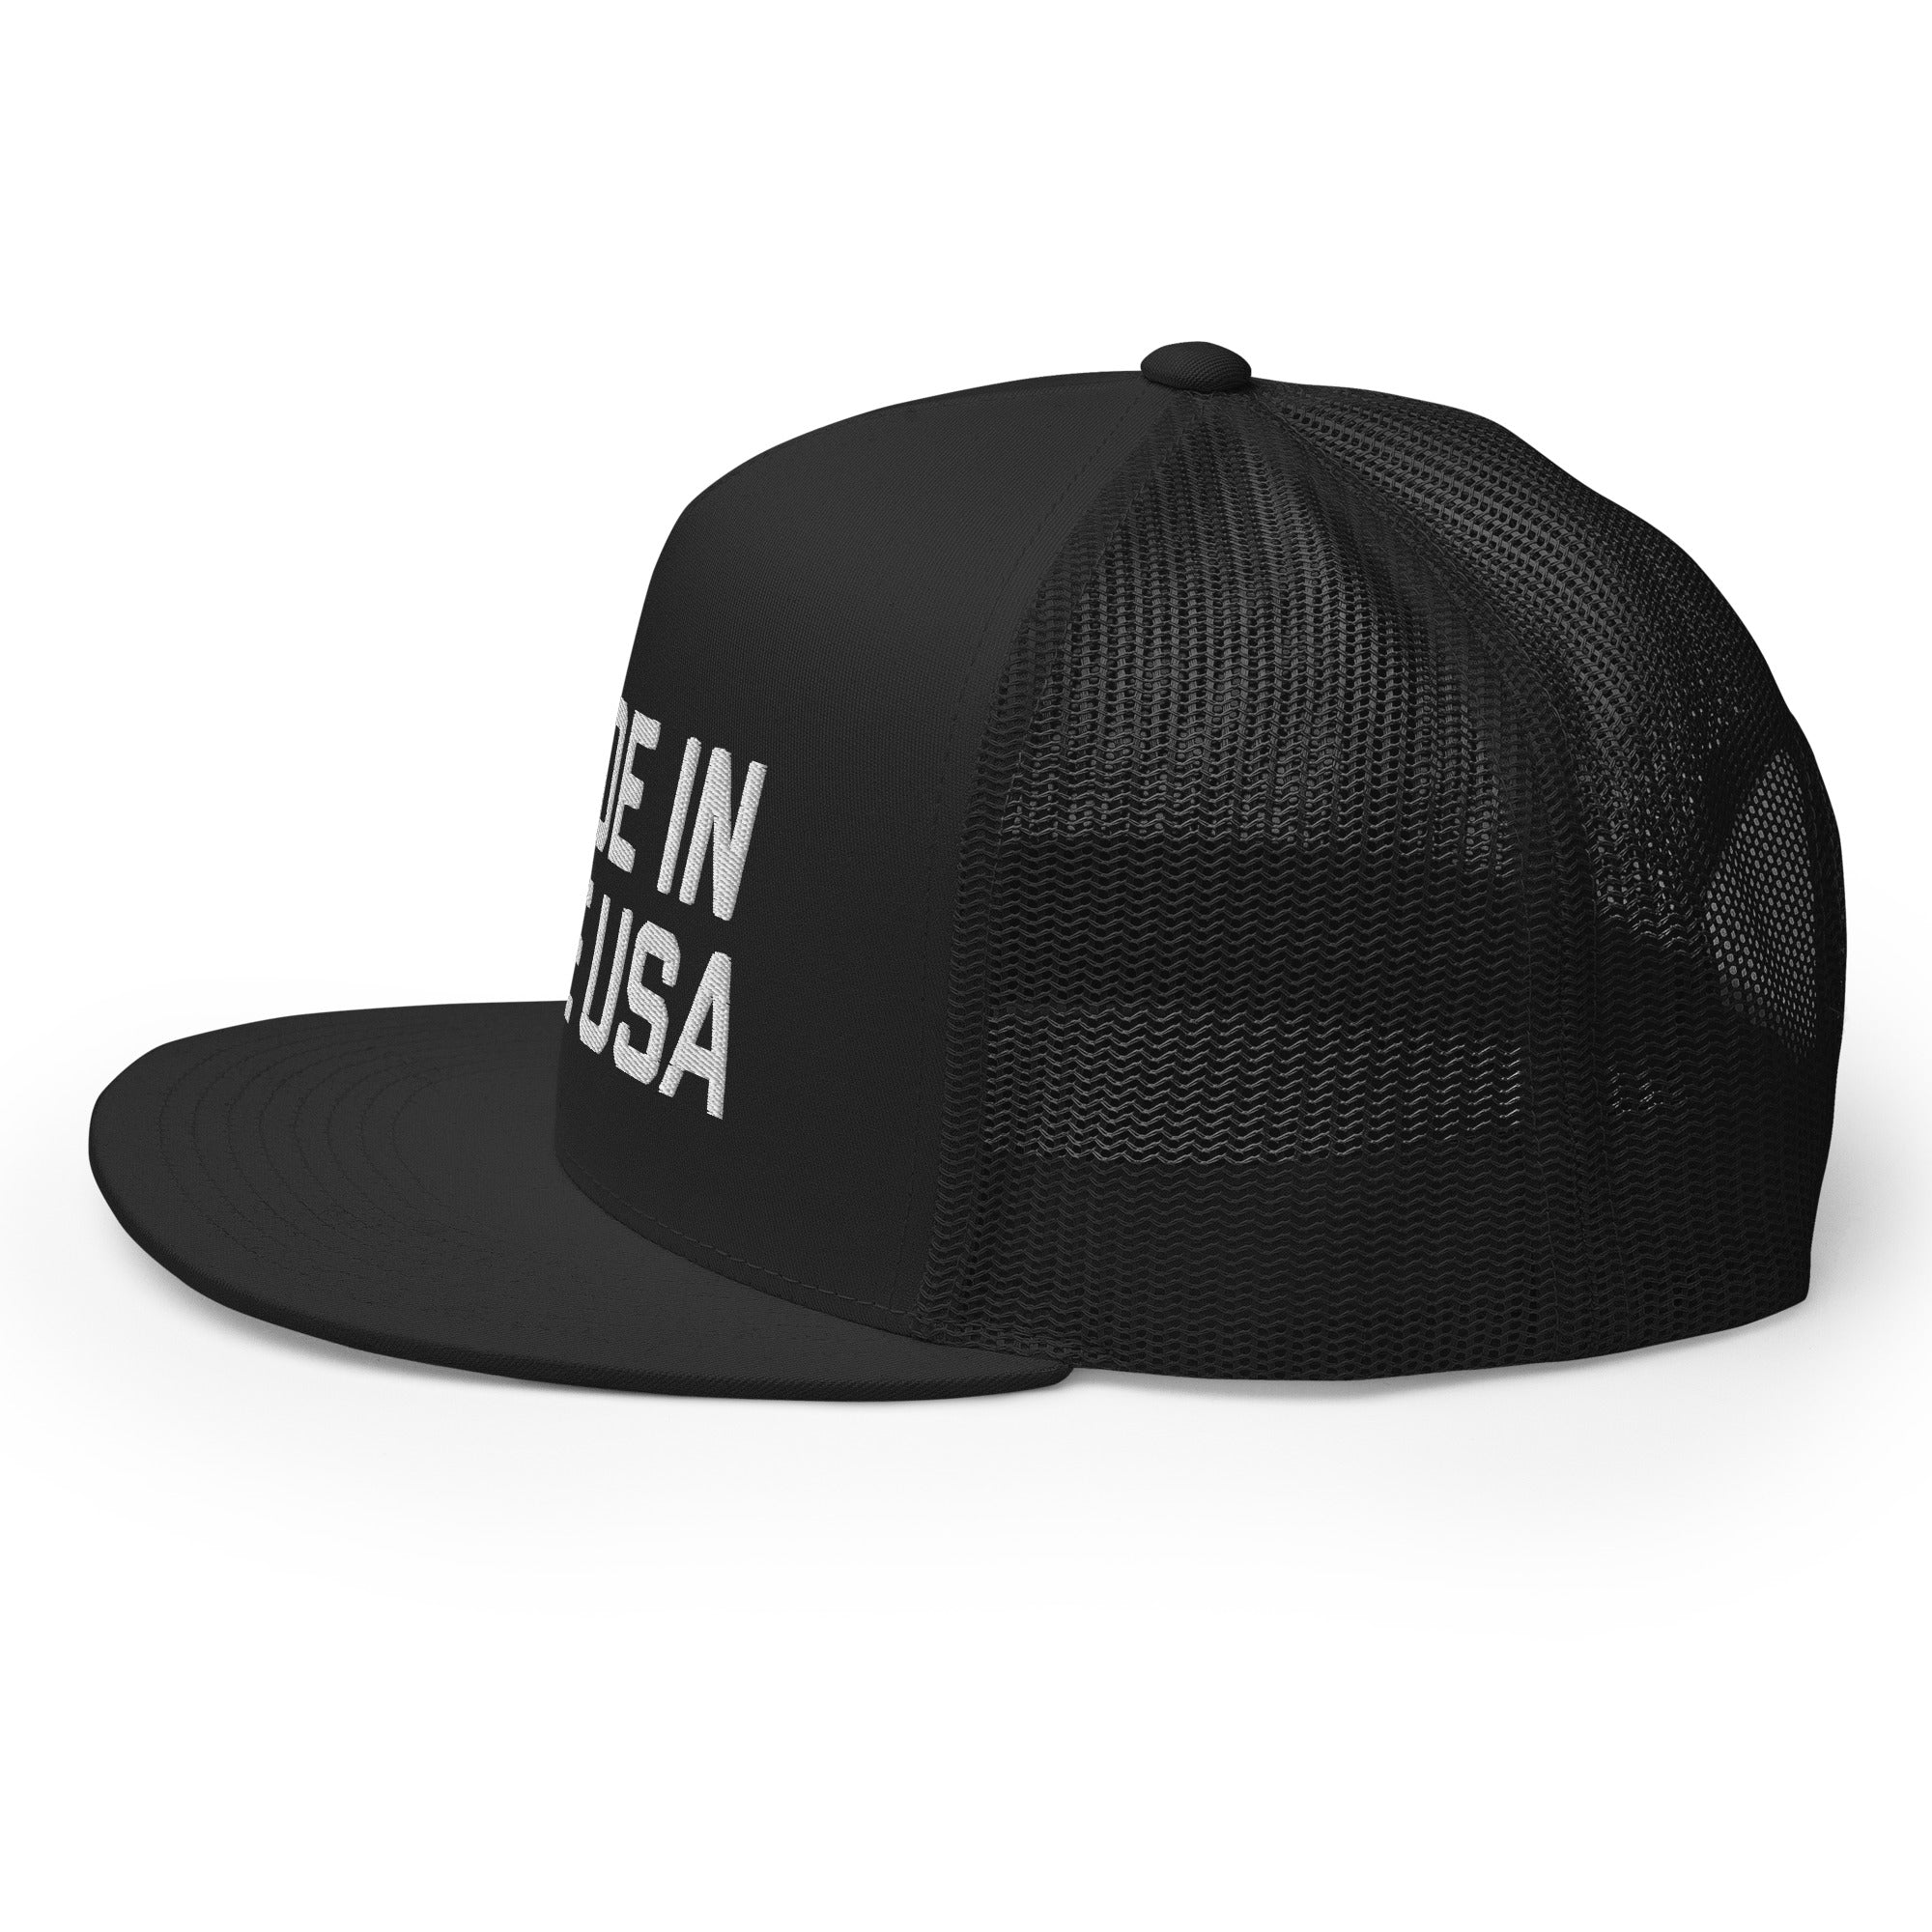 Made In the USA - Flat Bill Trucker Hat